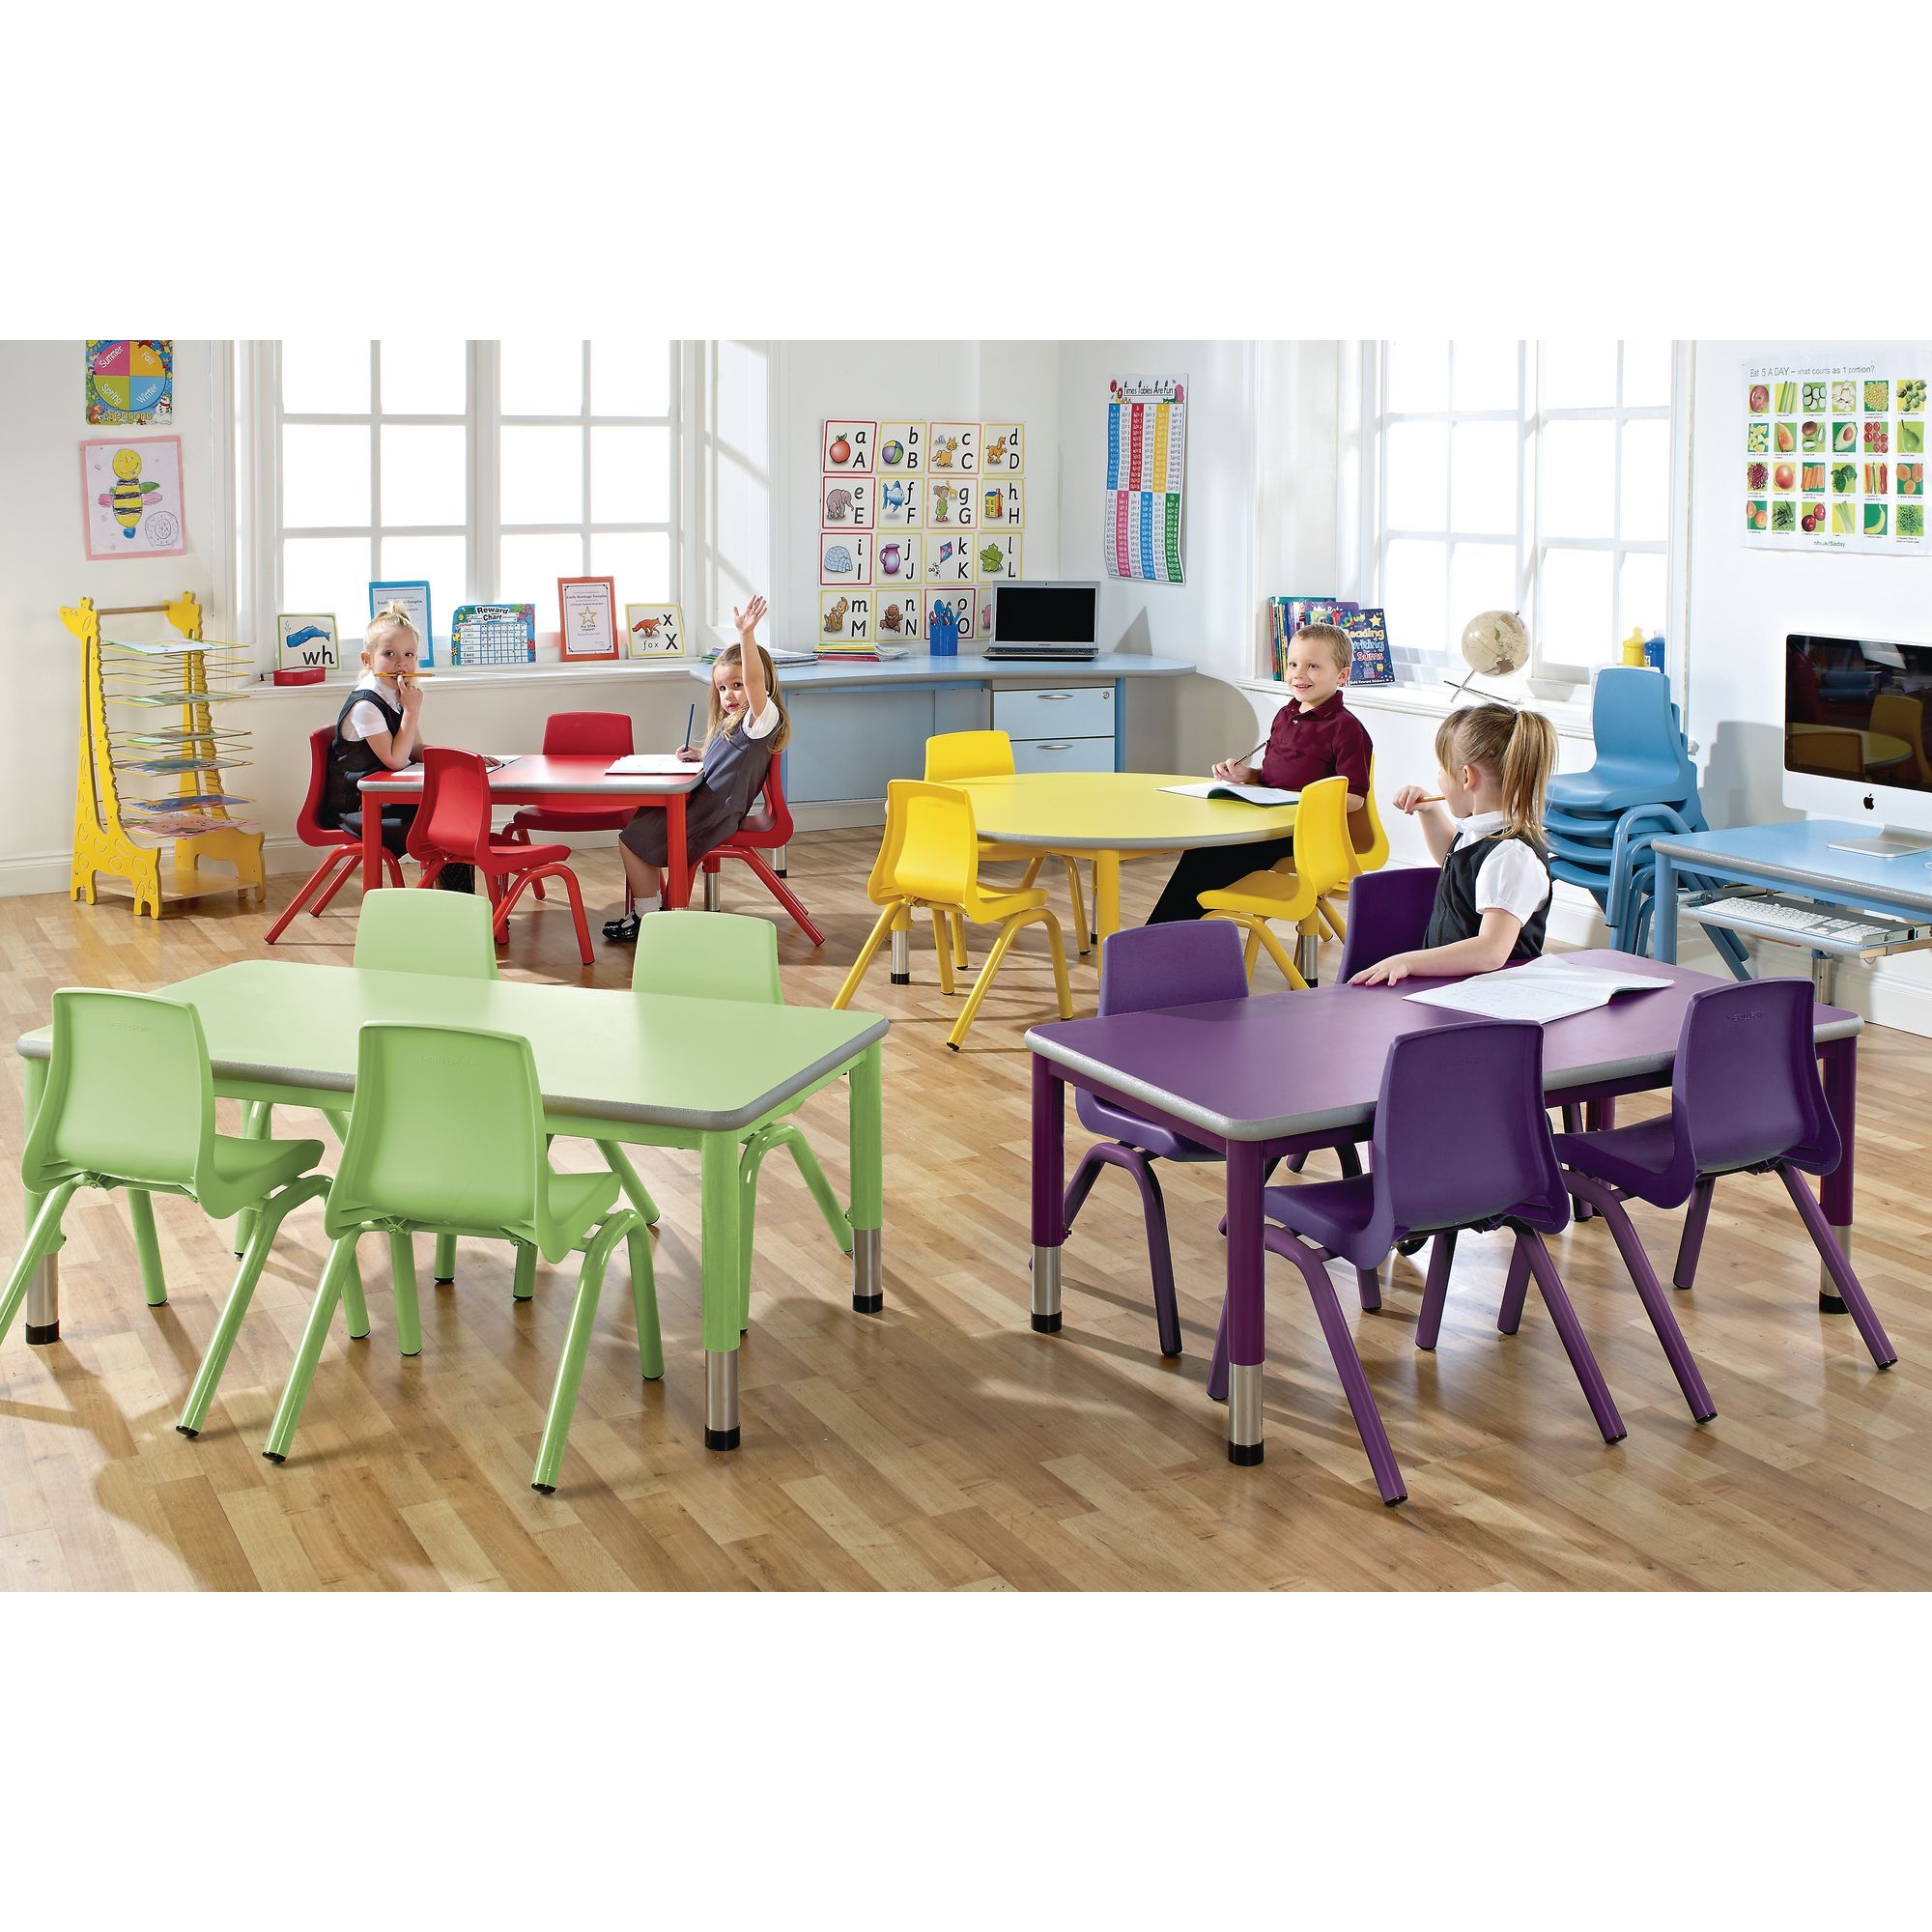 Harlequin Rectangular Height Adjustable Steel Classroom Pack: Table and 4 Chairs - 900 x 600 x 460mm - Red